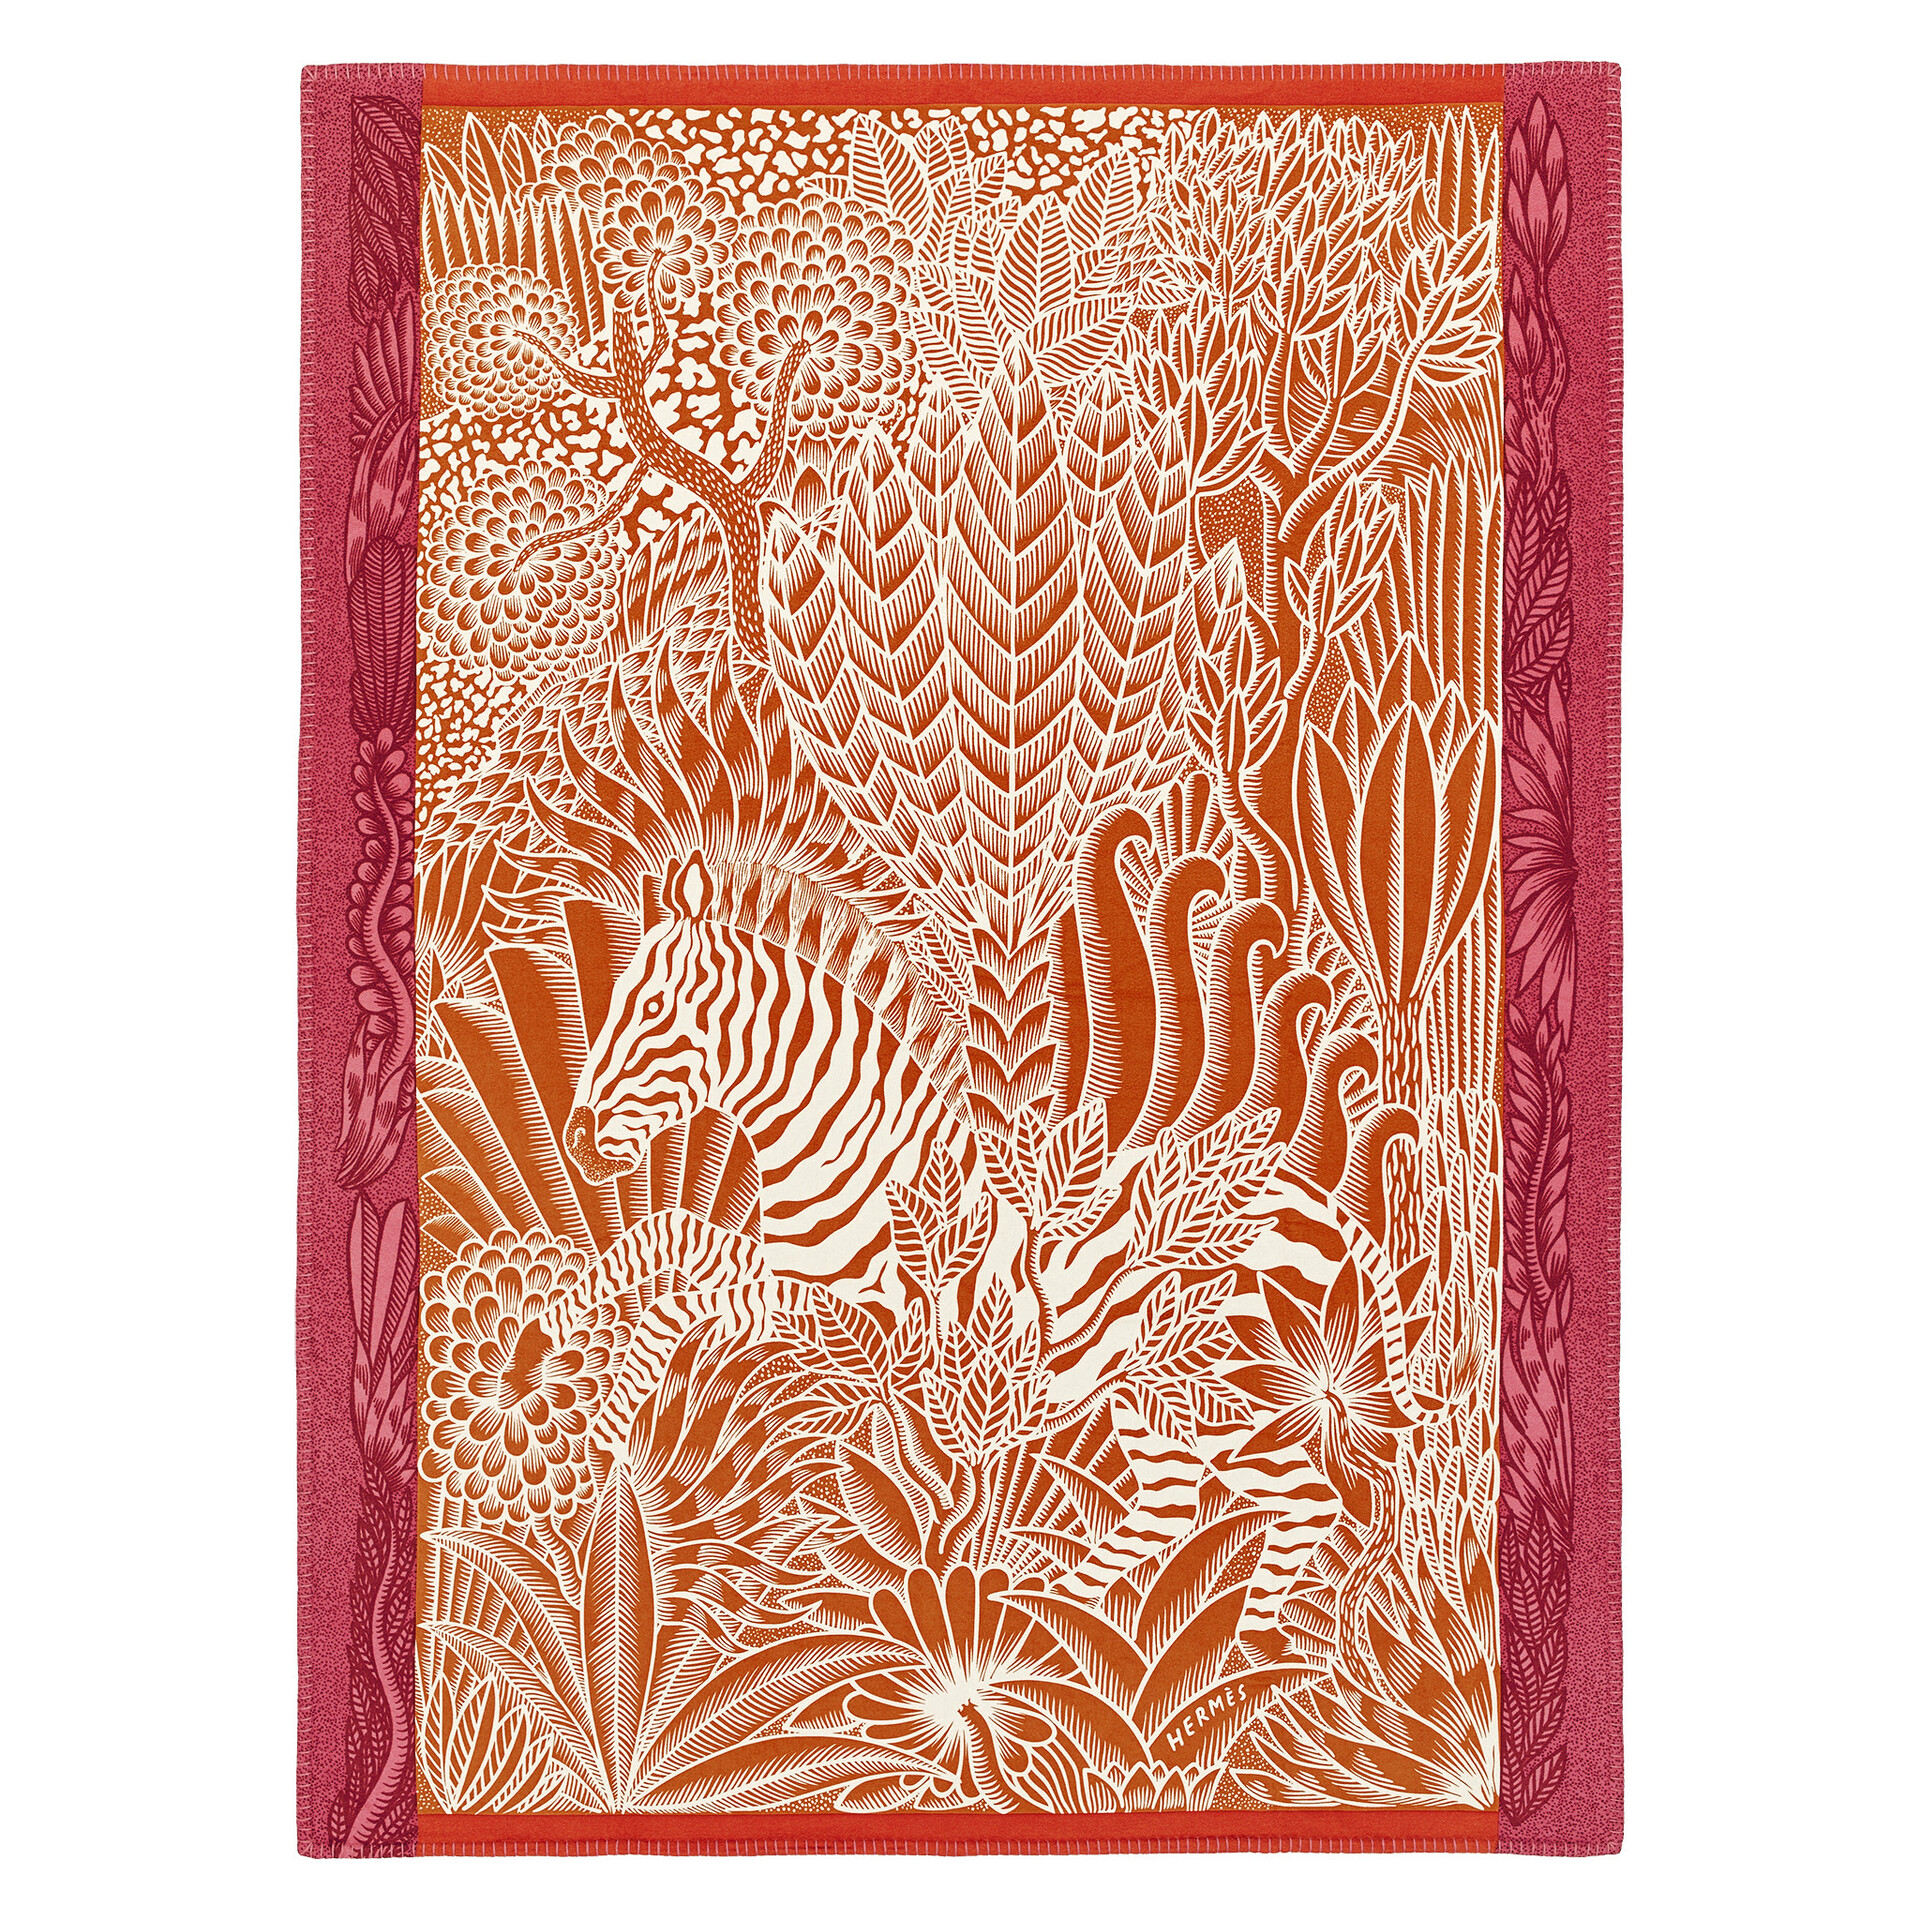 Printed "Animaux Camoufés" plaid in cashmere, screen painting, 140 x 192 cm